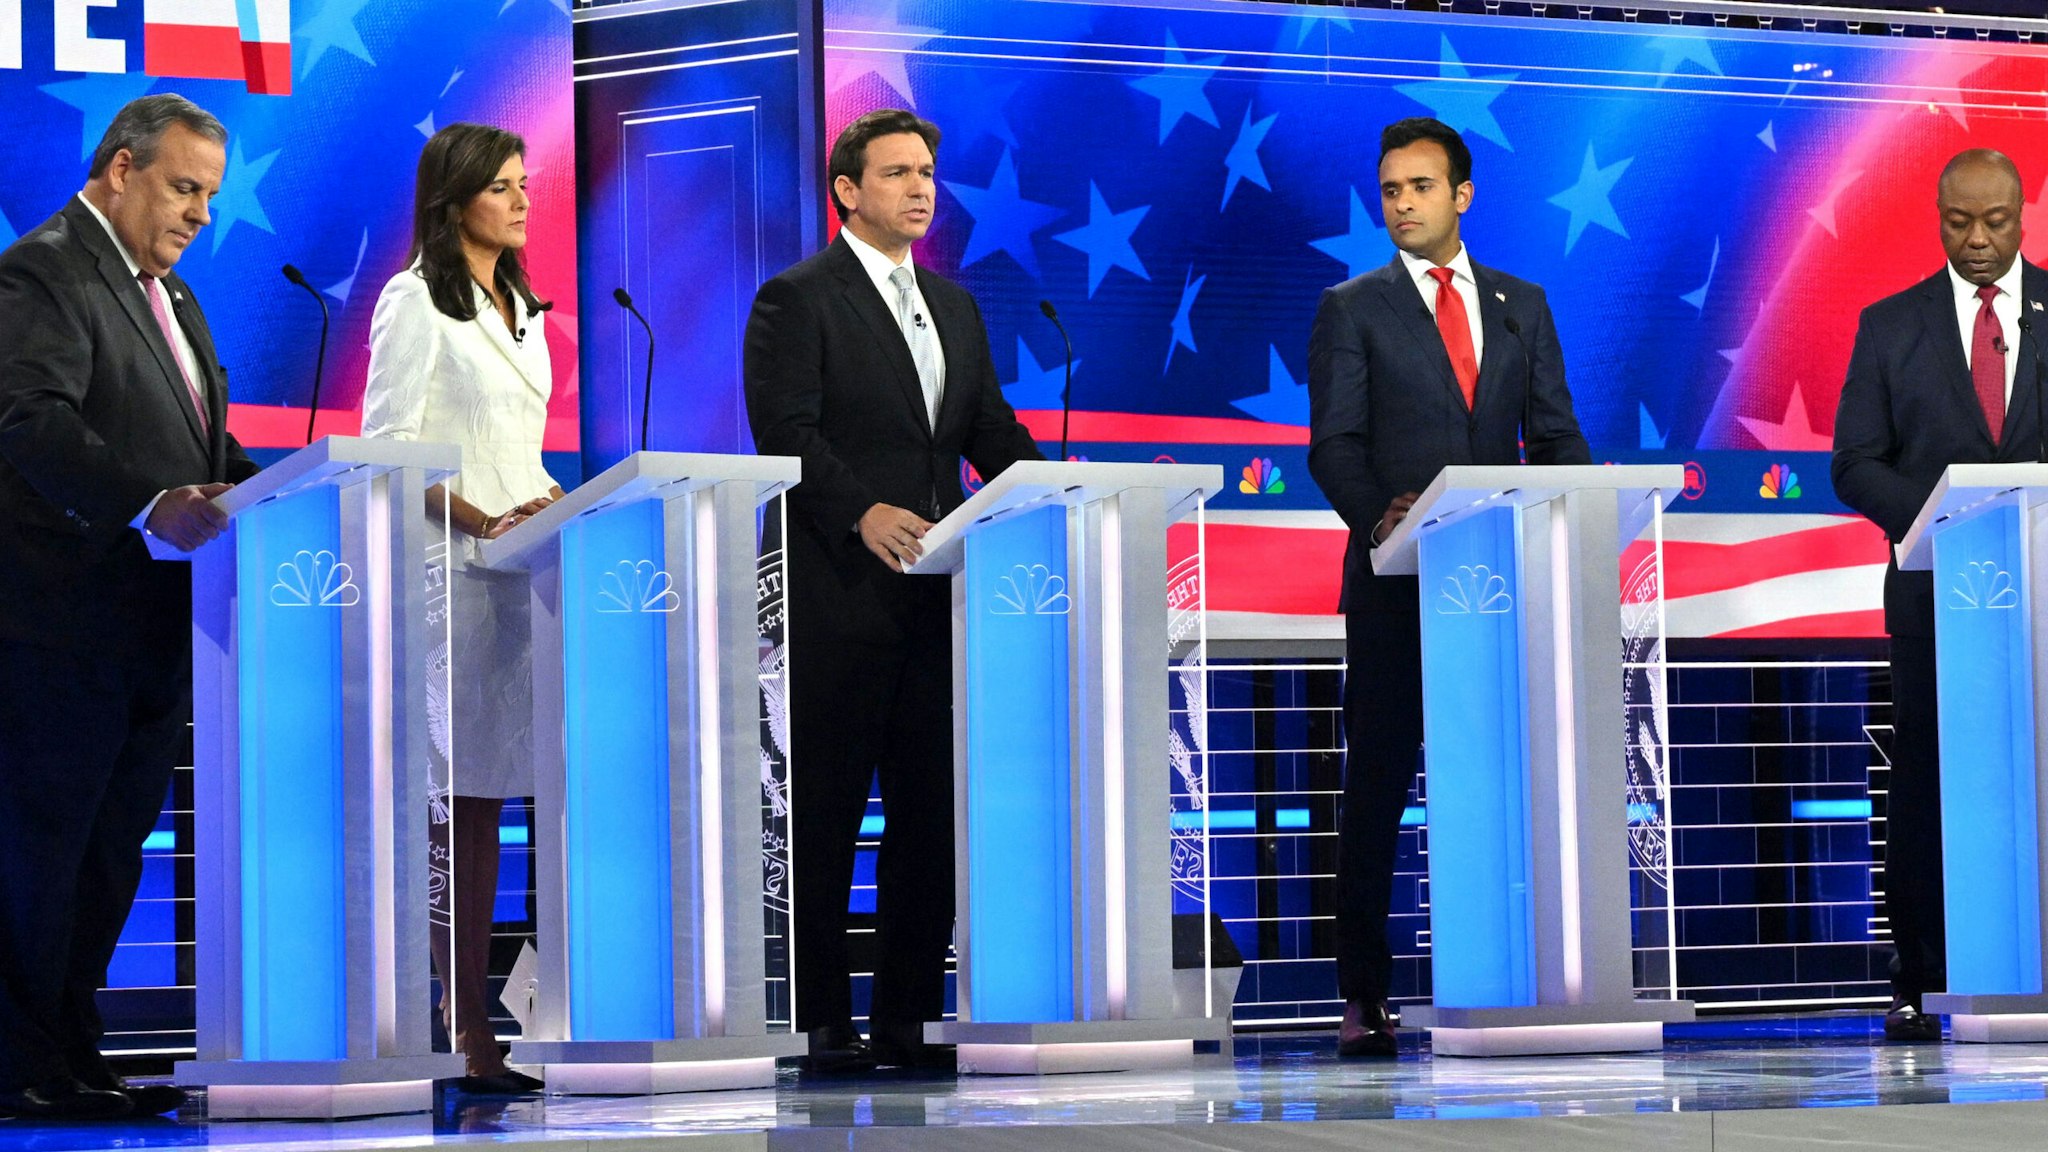 (From L) Former Governor of New Jersey Chris Christie, former Governor from South Carolina and UN ambassador Nikki Haley, Florida Governor Ron DeSantis, entrepreneur Vivek Ramaswamy, and US Senator from South Carolina Tim Scott attend the third Republican presidential primary debate at the Knight Concert Hall at the Adrienne Arsht Center for the Performing Arts in Miami, Florida, on November 8, 2023.